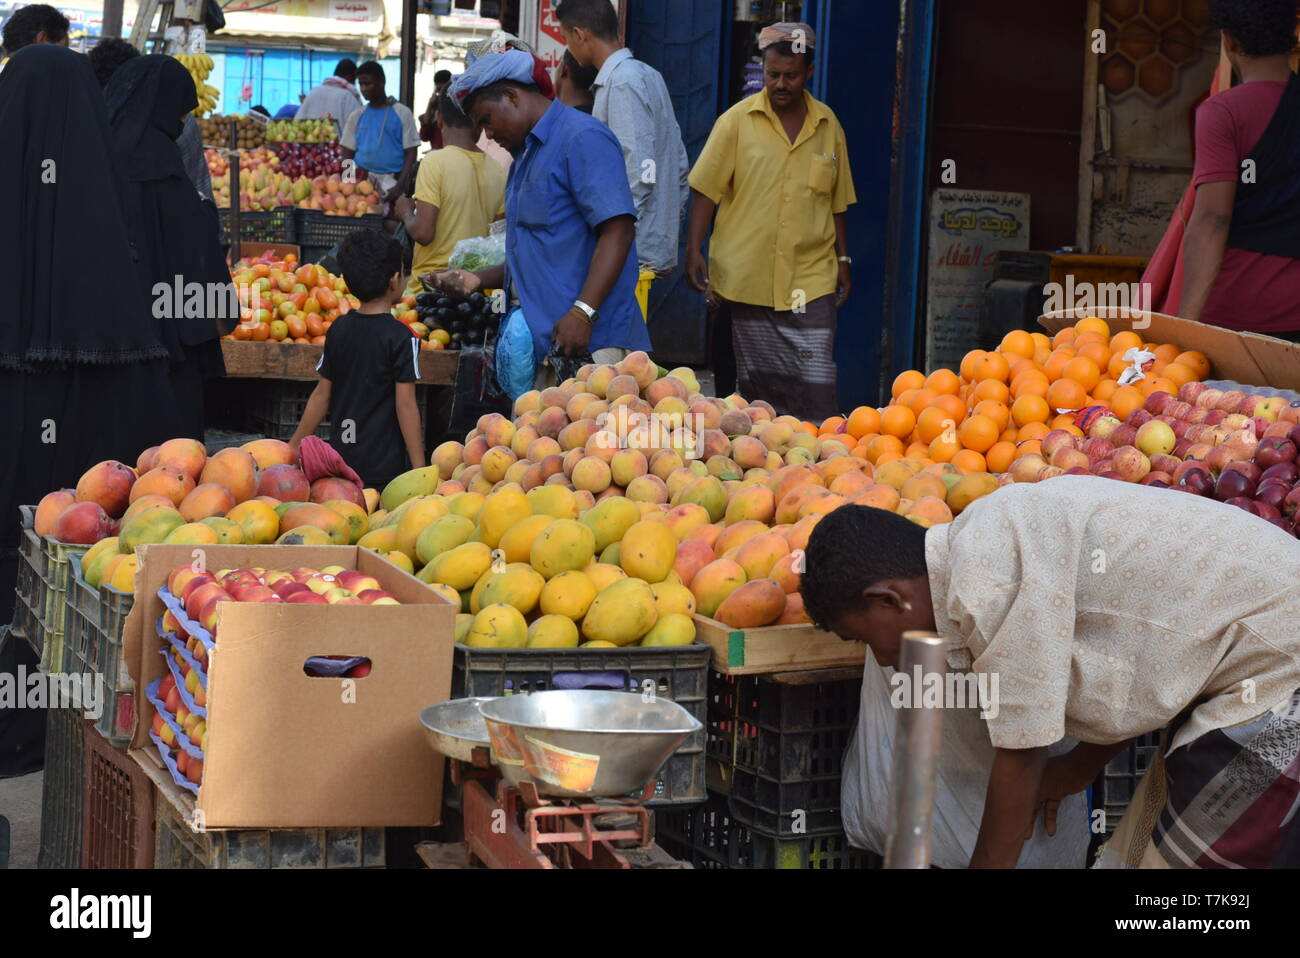 (190507) -- ADEN, May 7, 2019 (Xinhua) -- Yemeni customers and vendors are seen at a market in the southern port city of Aden, Yemen, on May 7, 2019. People in the war-ridden Yemen complained about soaring prices of vegetables, fruits and other essentials as Ramadan began, a holy month during which Muslims worldwide abstain from eating and drinking from dawn to dusk. (Xinhua/Murad Abdo) Stock Photo